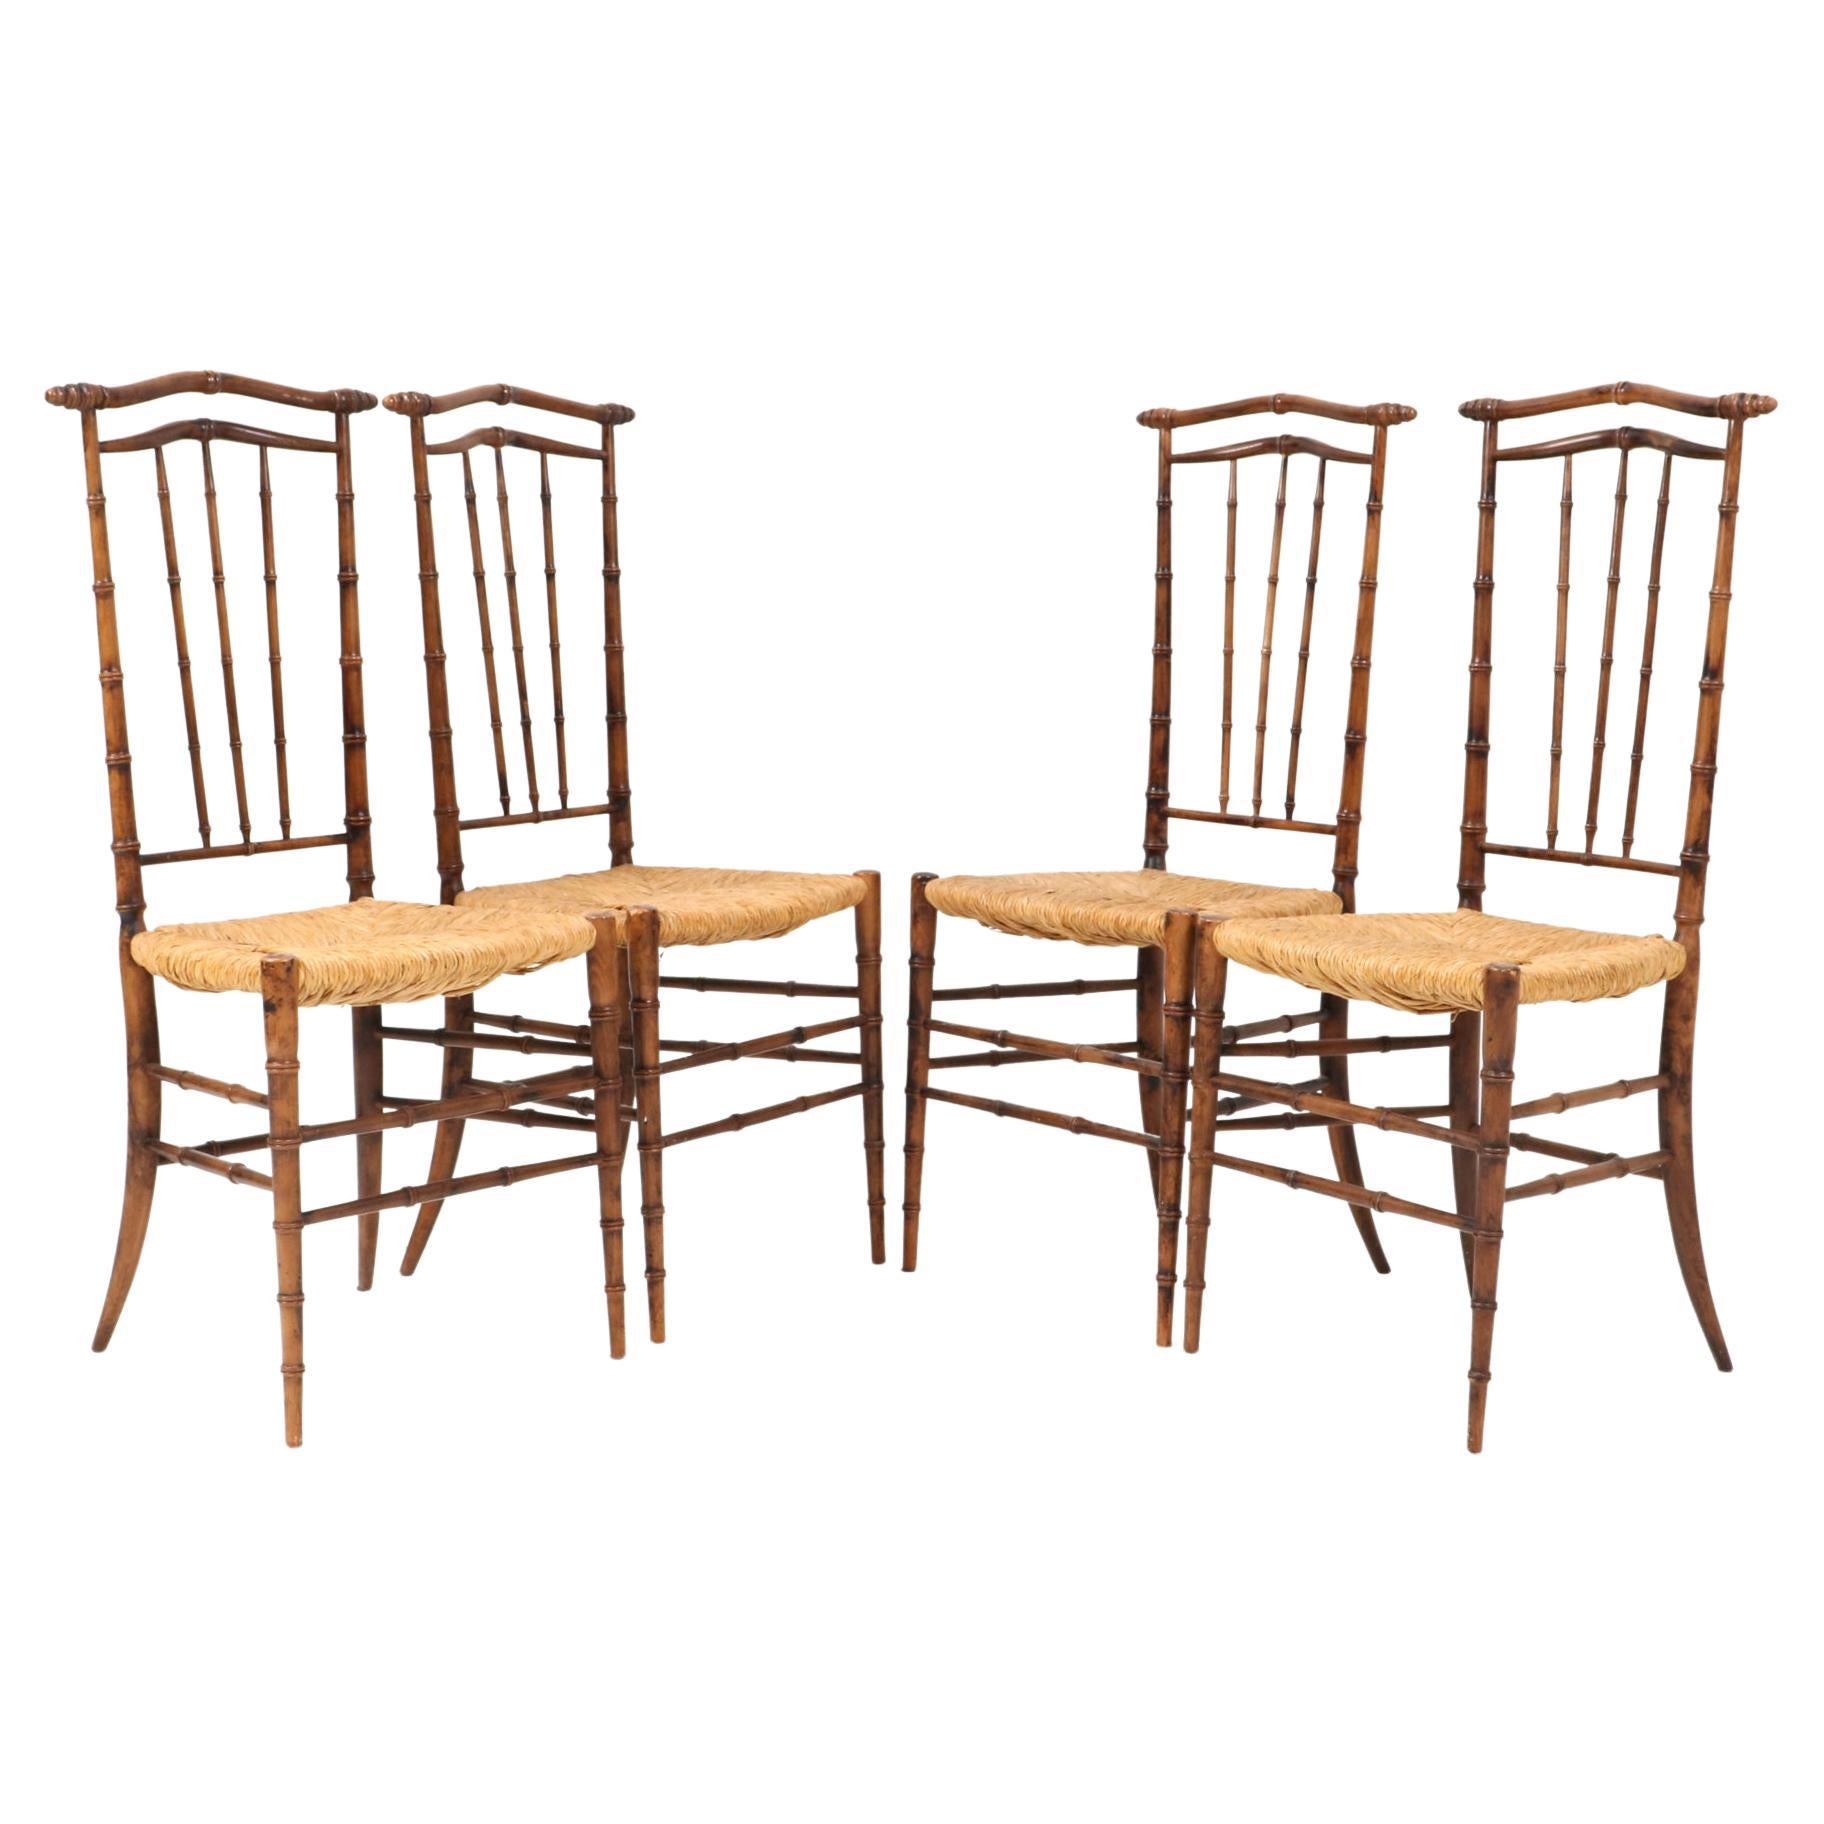 Four Beech Mid-Century Modern Faux Bamboo High Back Dining Room Chairs, 1970s For Sale